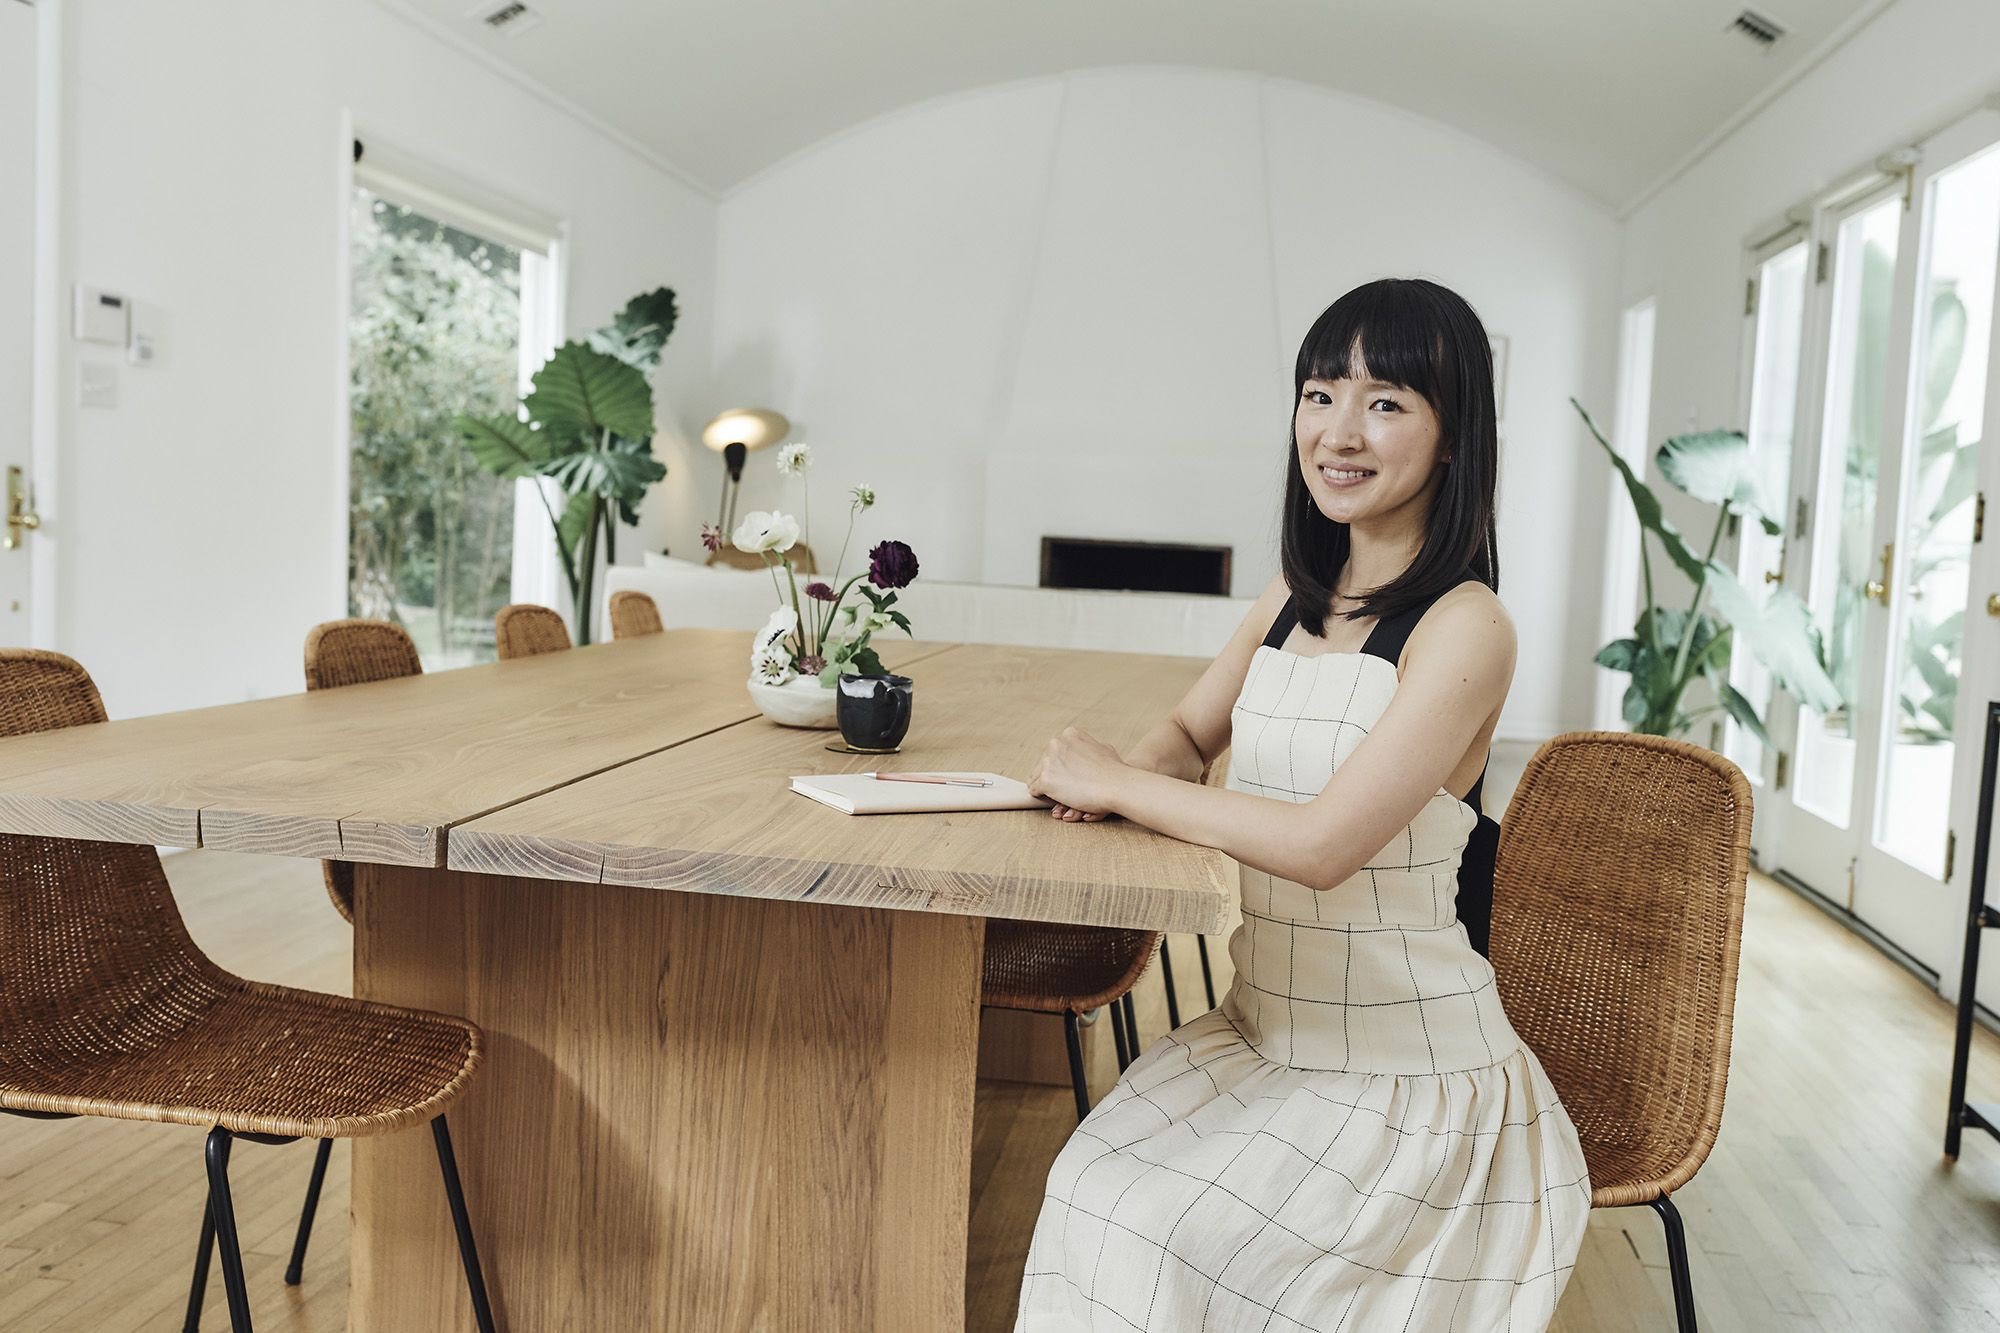 Marie Kondo has 'kind of given up' on tidying with three kids - Upworthy